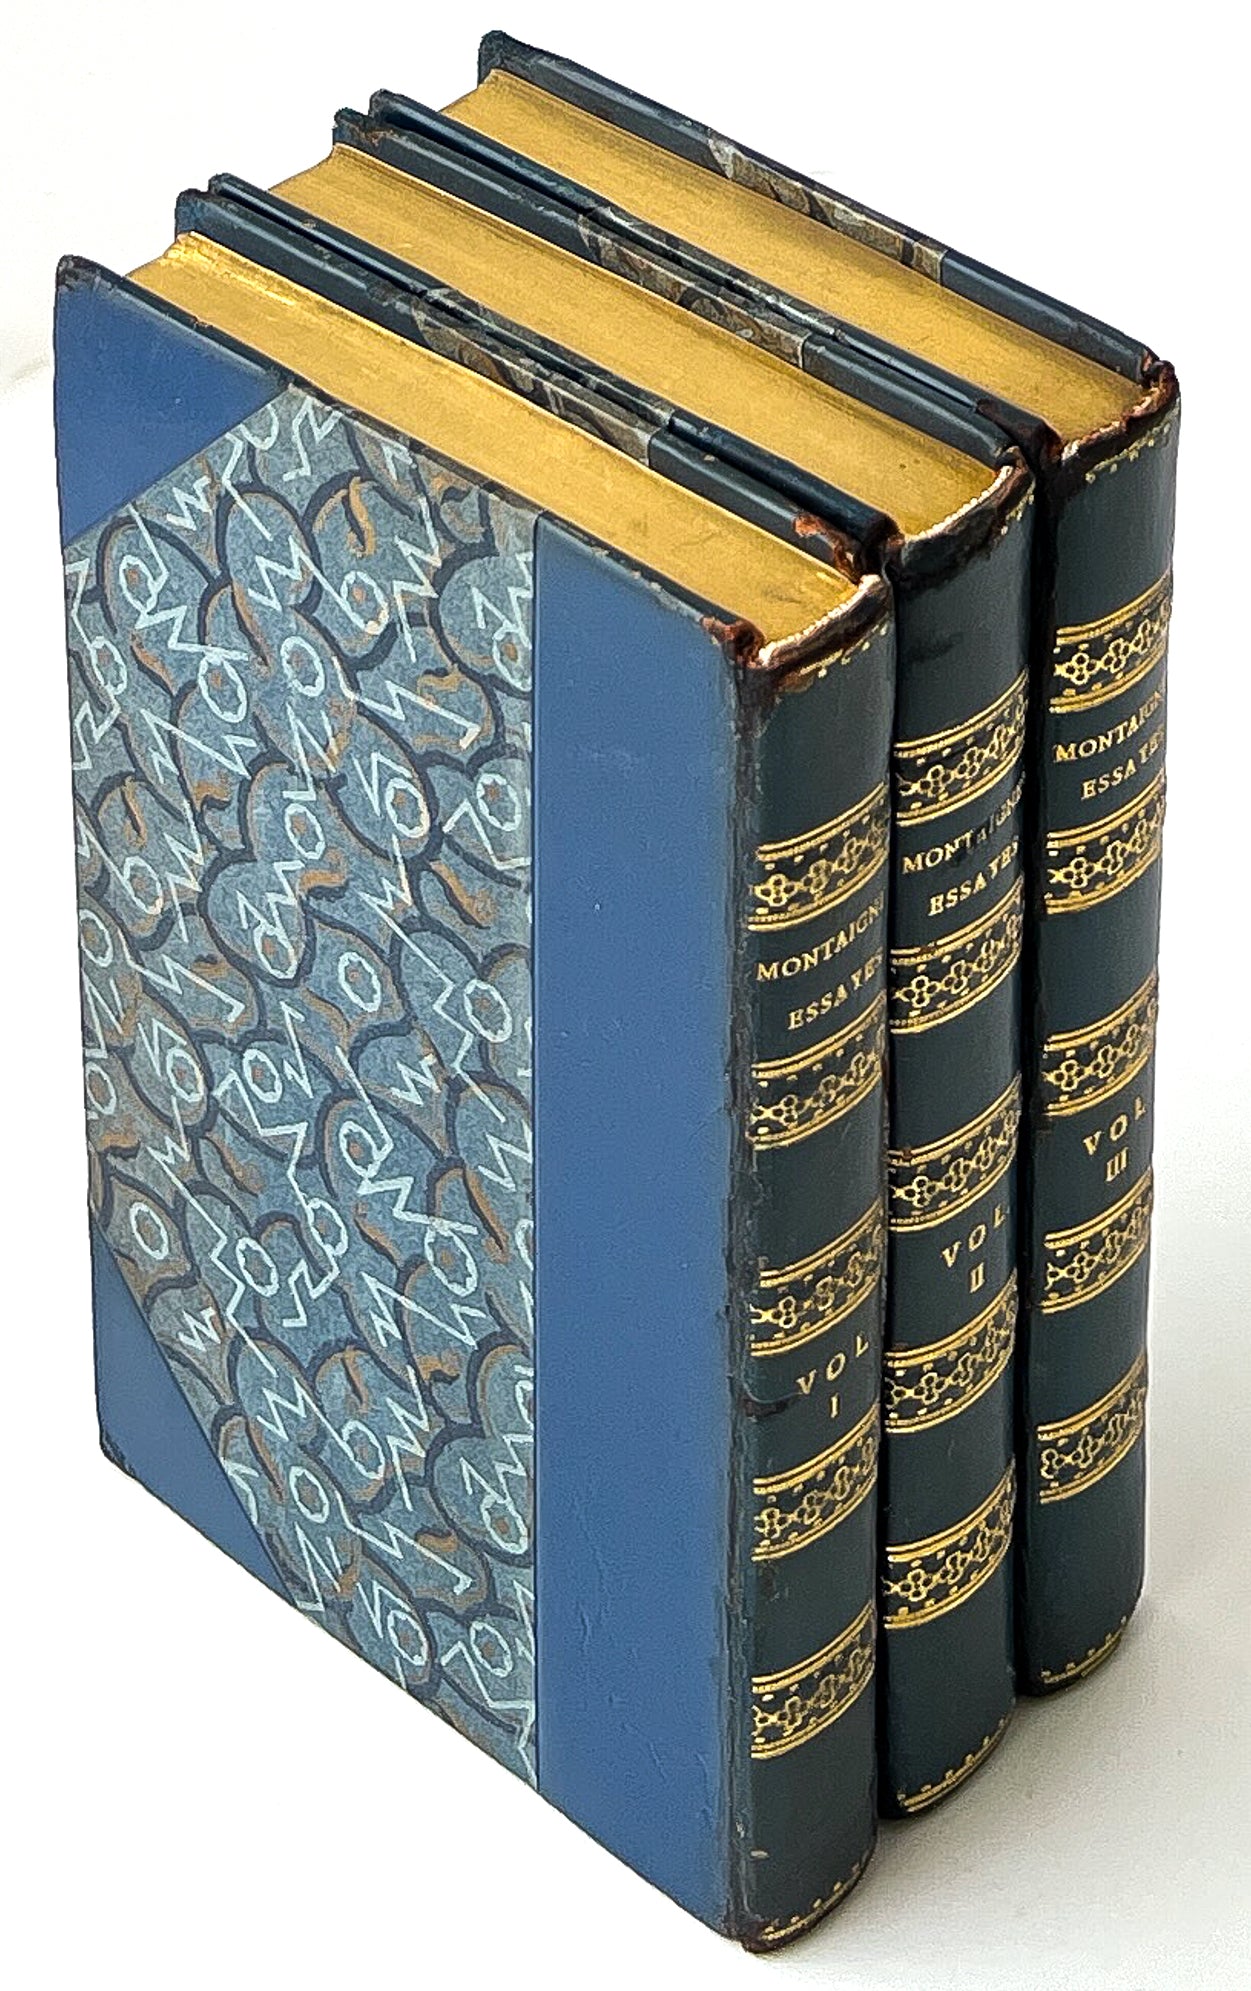 The Essayes of Michael Lord of Montaigne (Montaigne's Essays, 3 volumes in Bayntun Riviere fine binding)